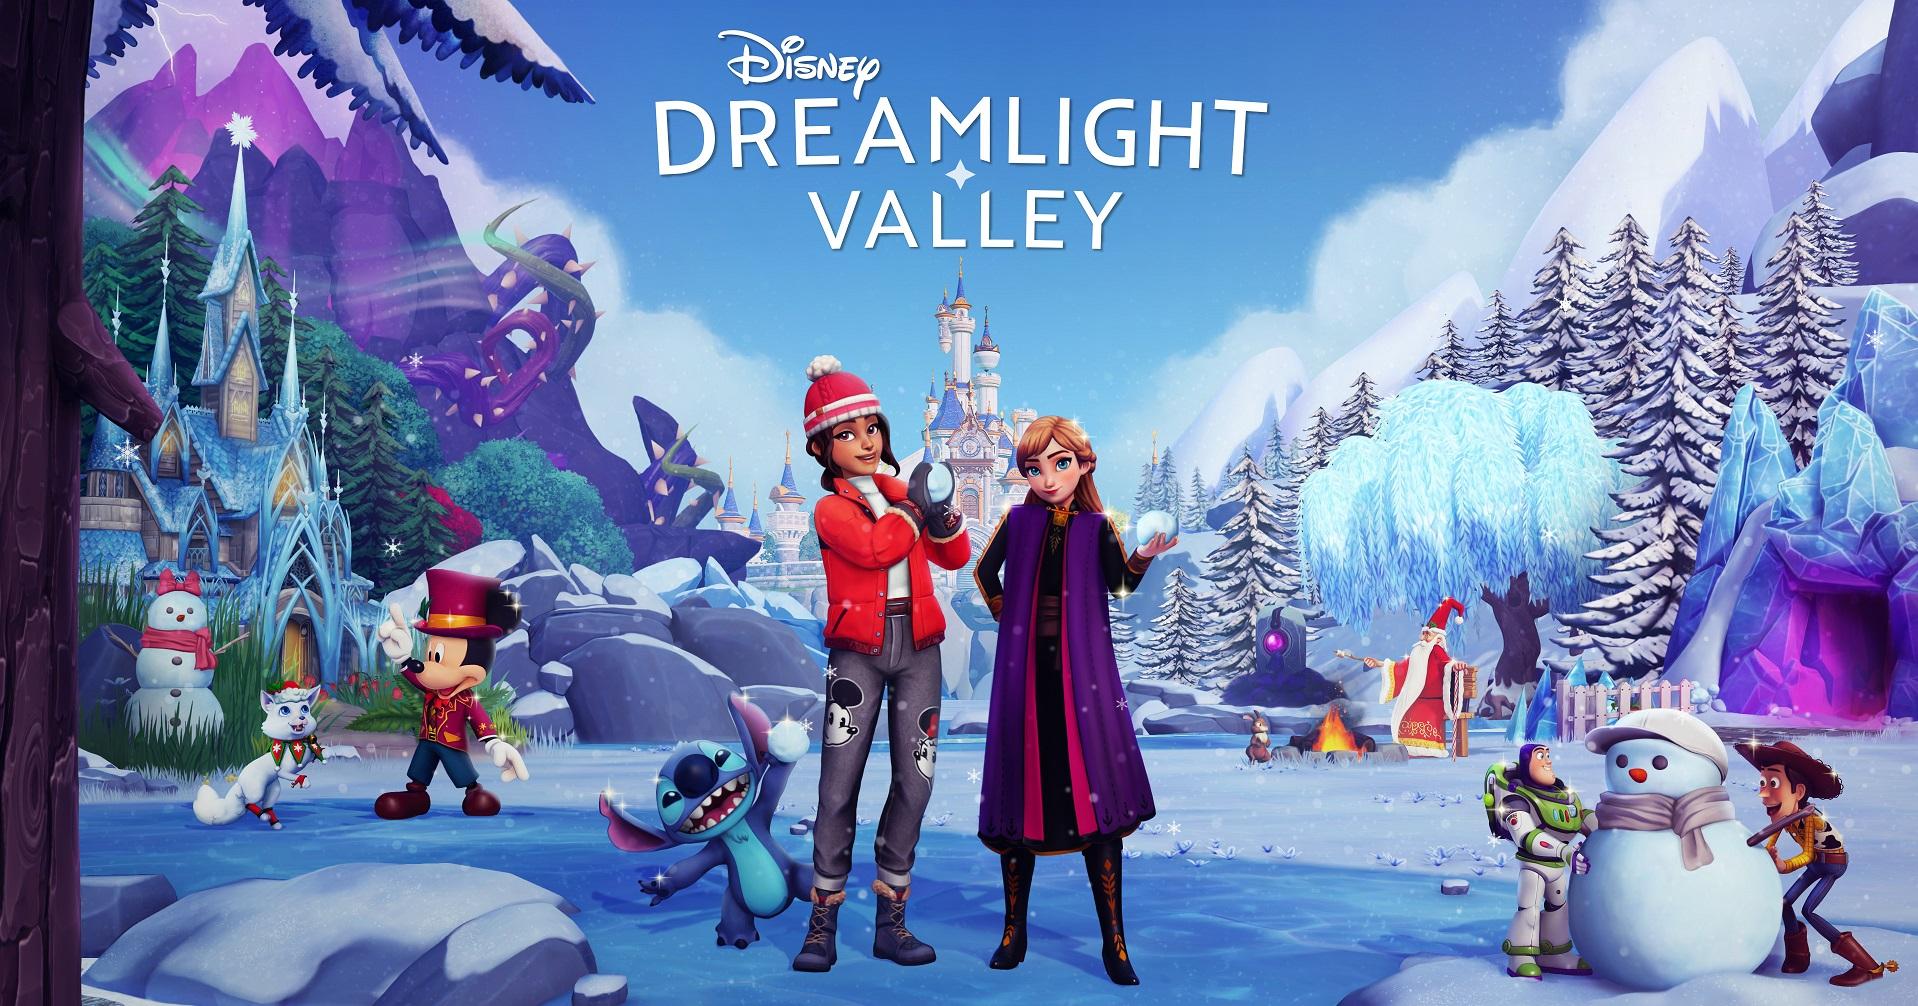 'Disney Dreamlight Valley' Premium Shop Prices and Issues Sparks Player